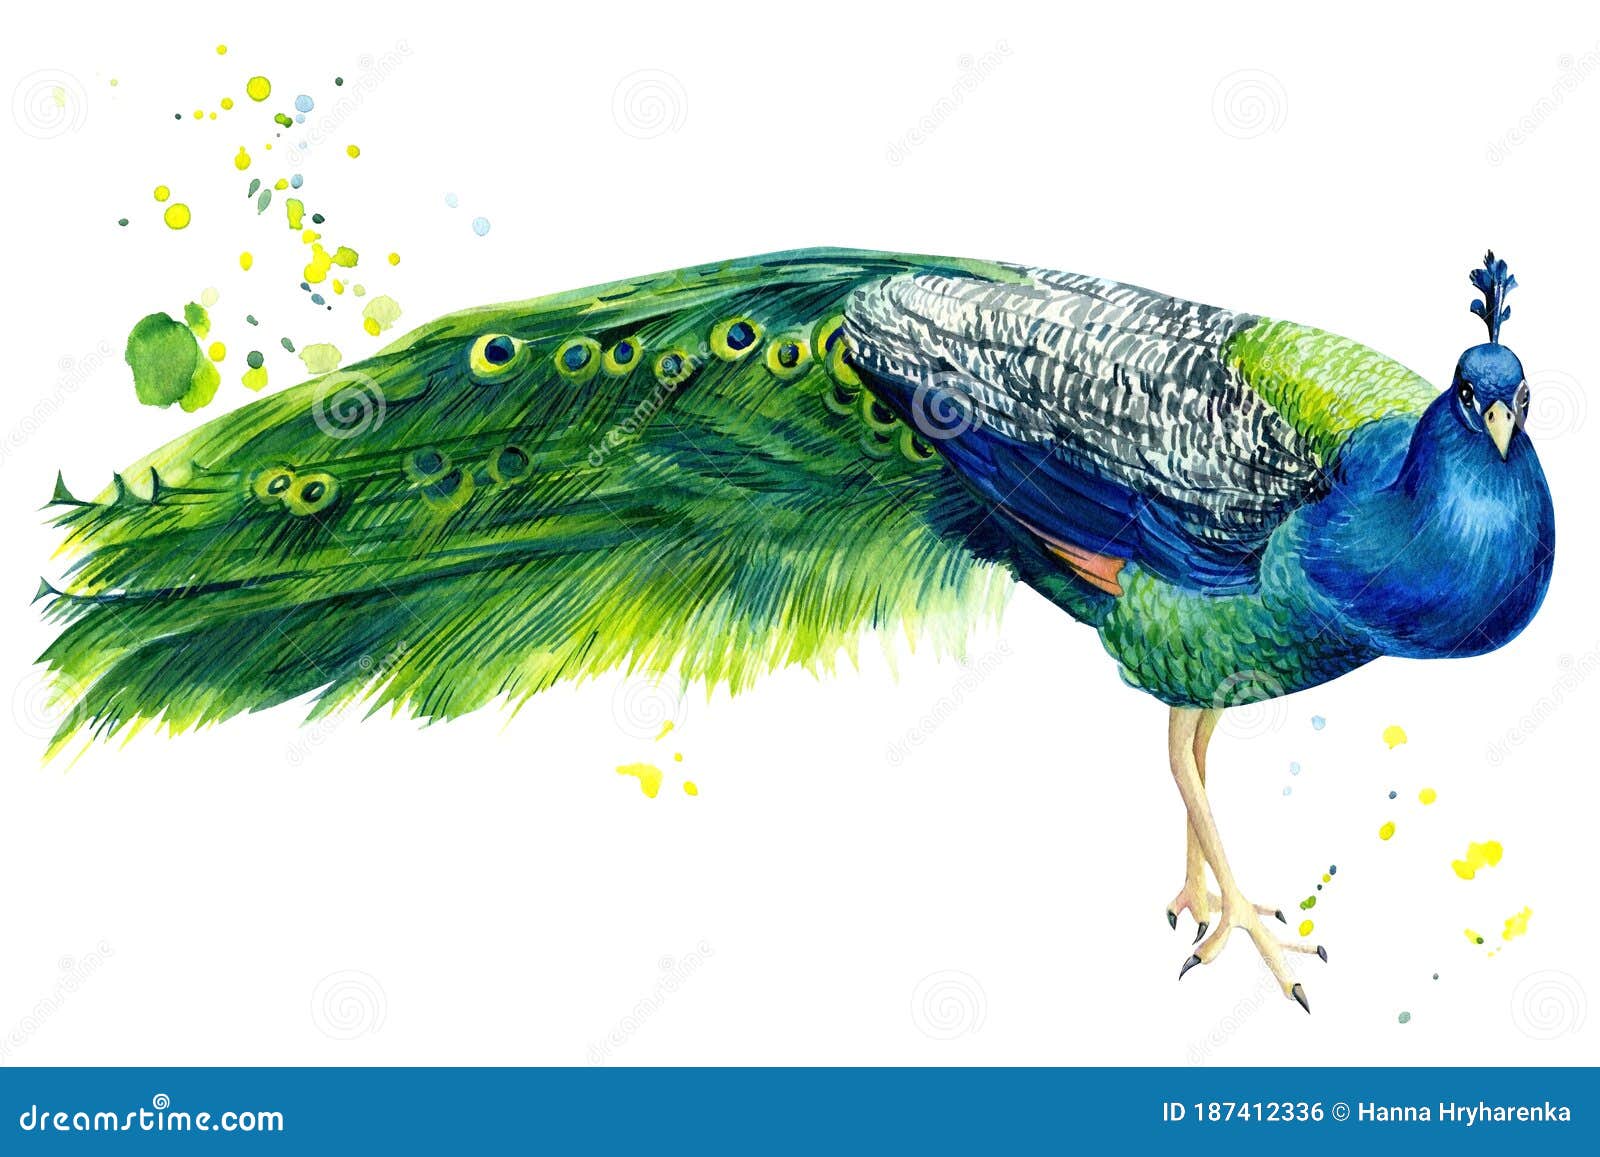 How to draw a Peacock? - Step by Step Drawing Guide for Kids